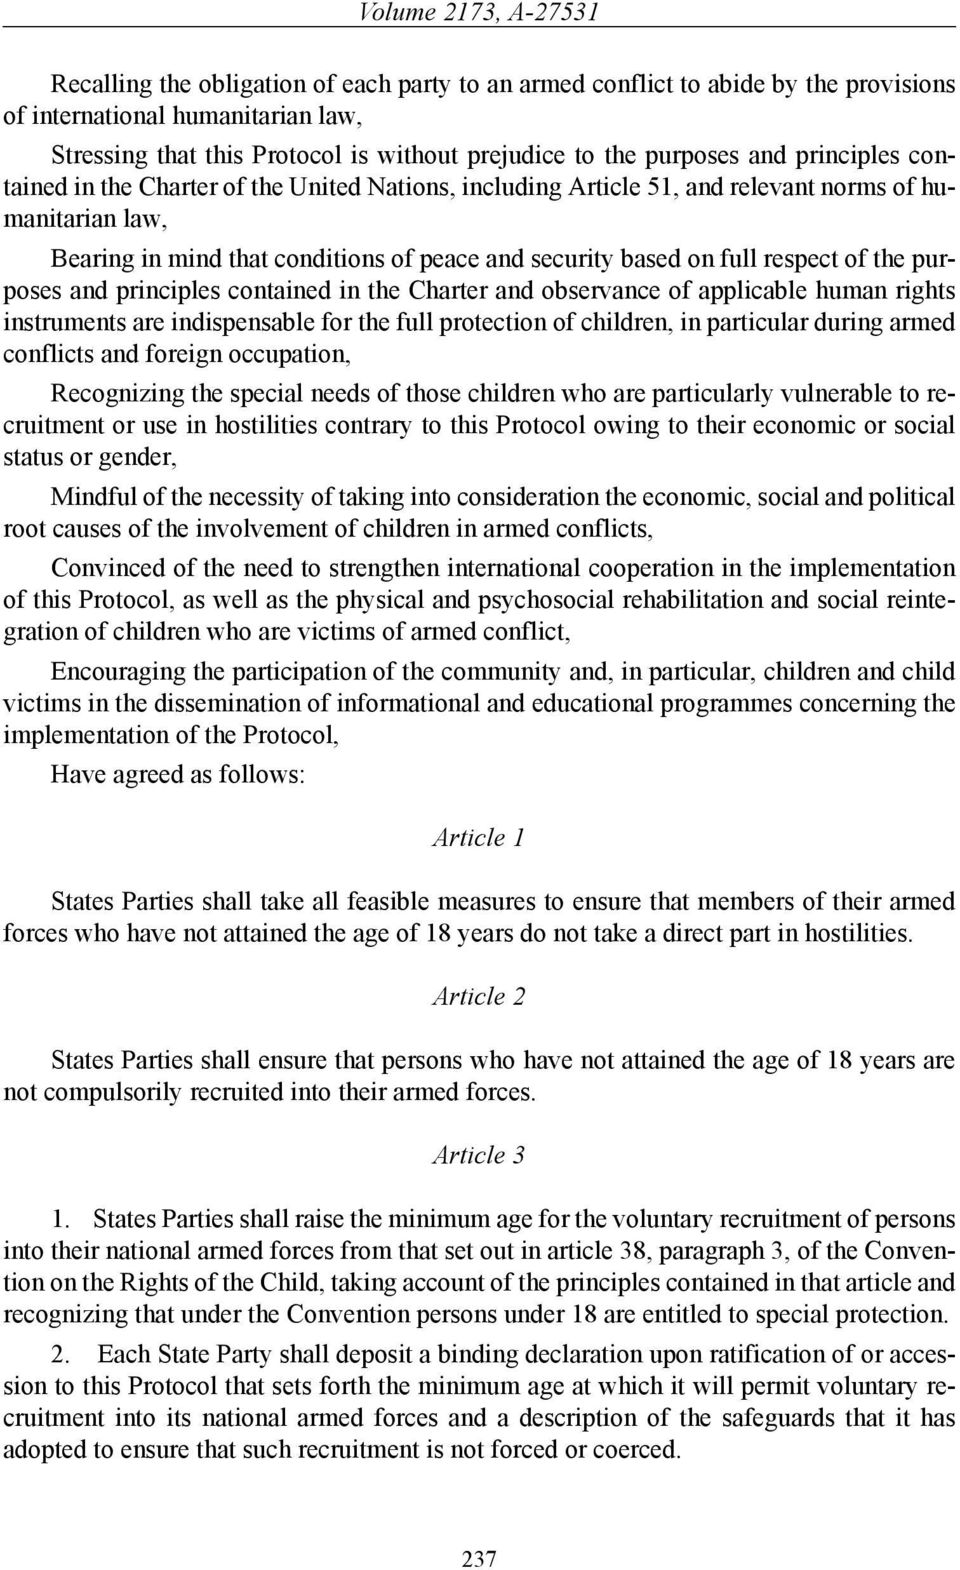 the purposes and principles contained in the Charter and observance of applicable human rights instruments are indispensable for the full protection of children, in particular during armed conflicts